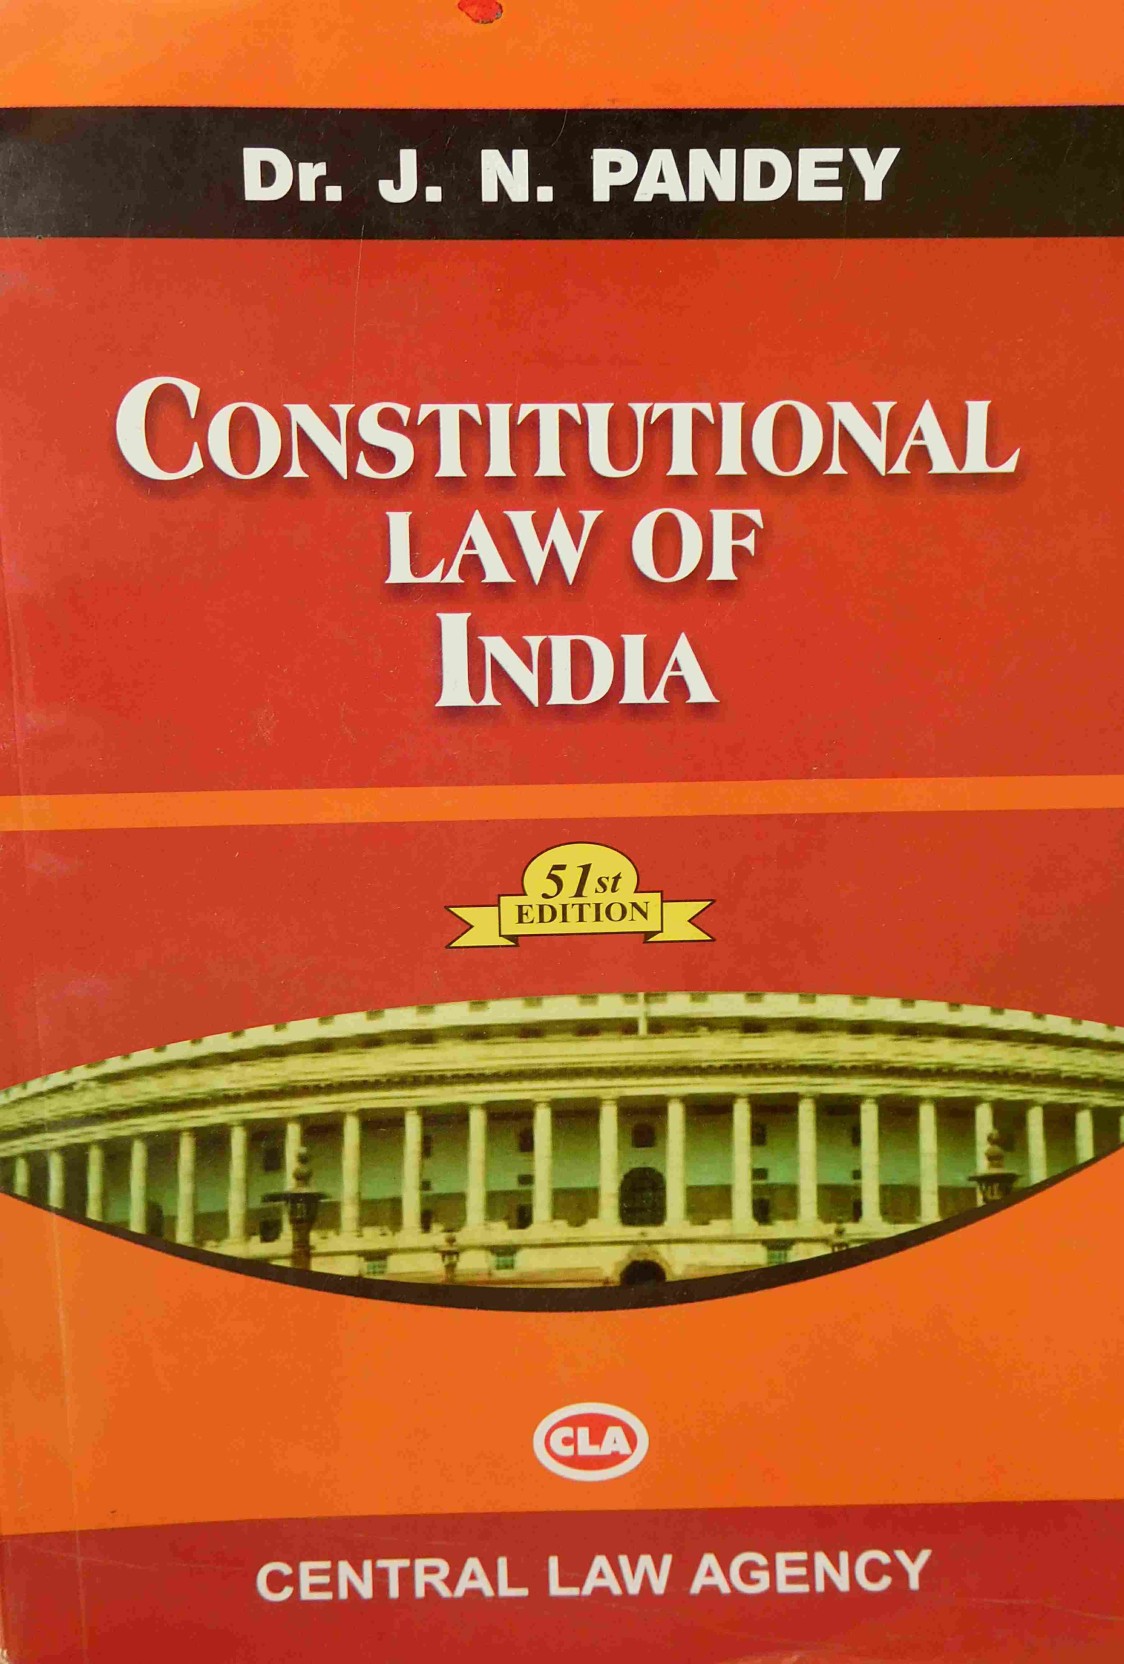 constitutional-law-of-india-by-jn-pandey-free